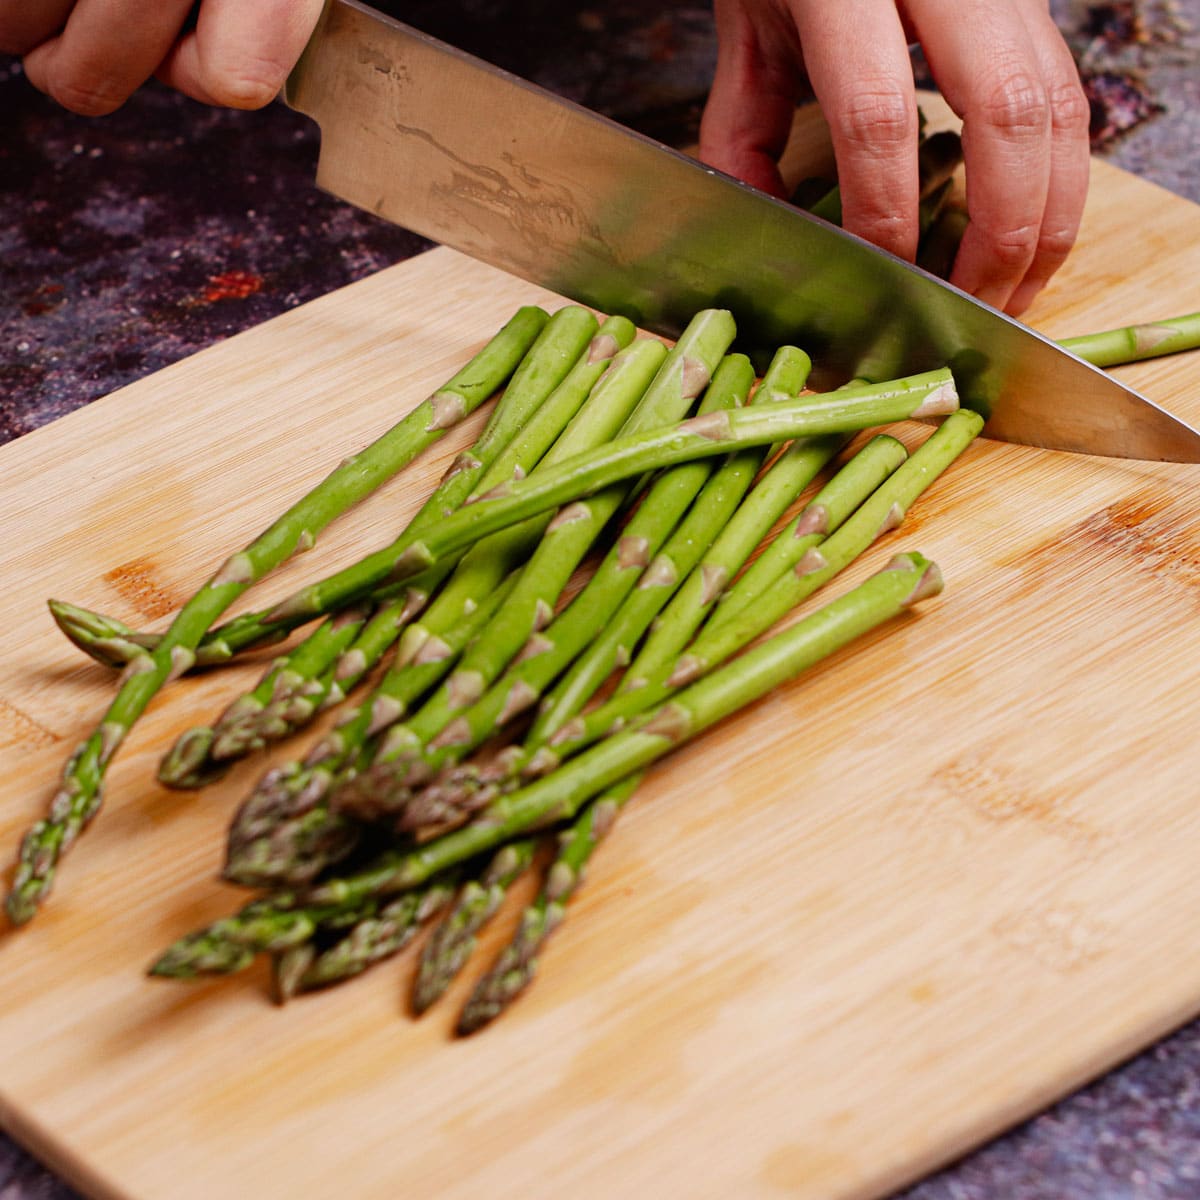 Trimming asparagus tough ends on a chopping board.